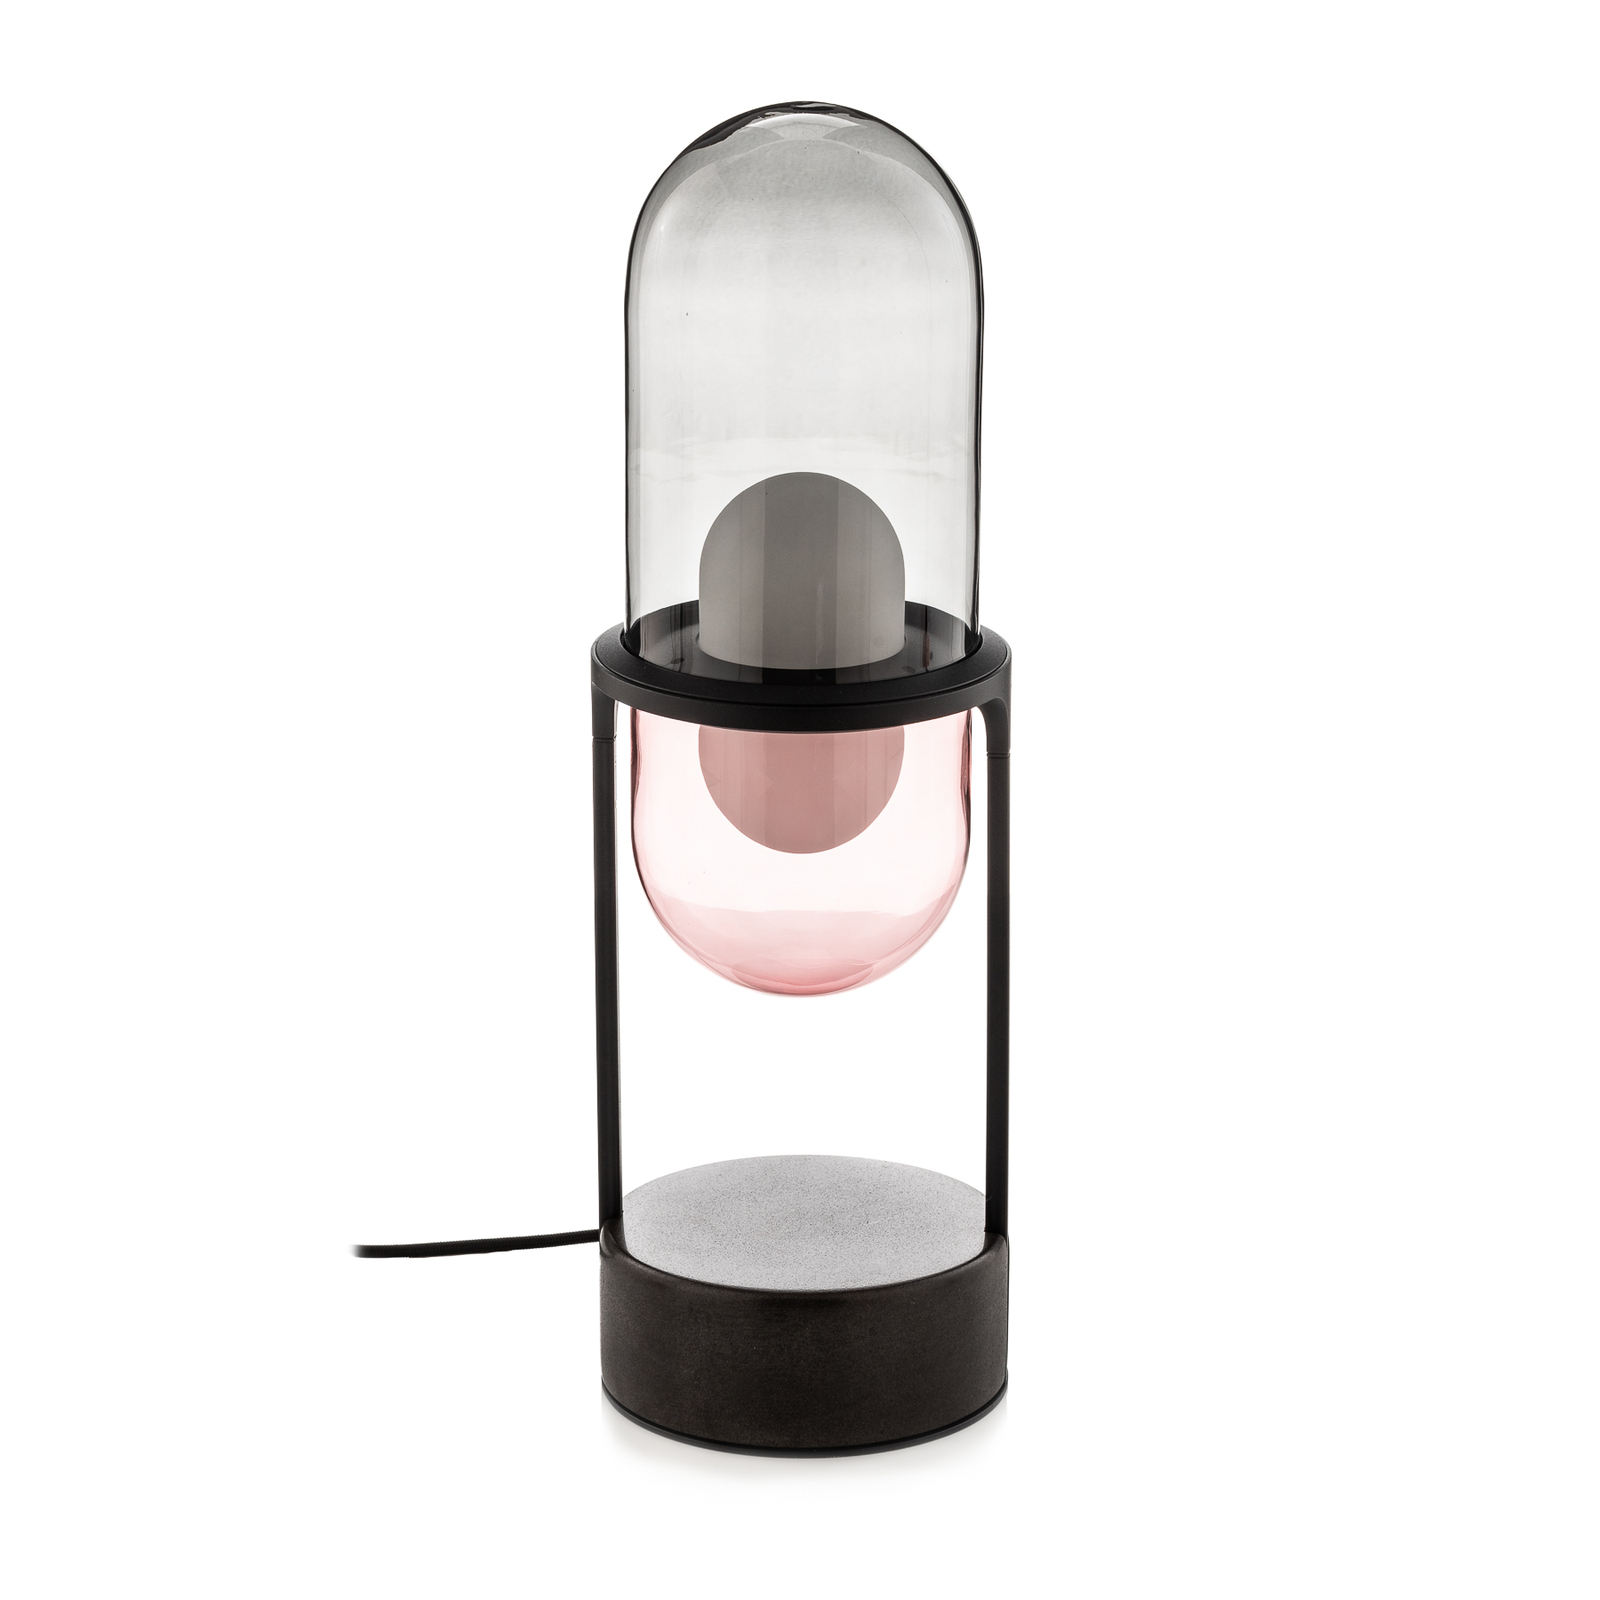 Pille LED table lamp, grey/magenta